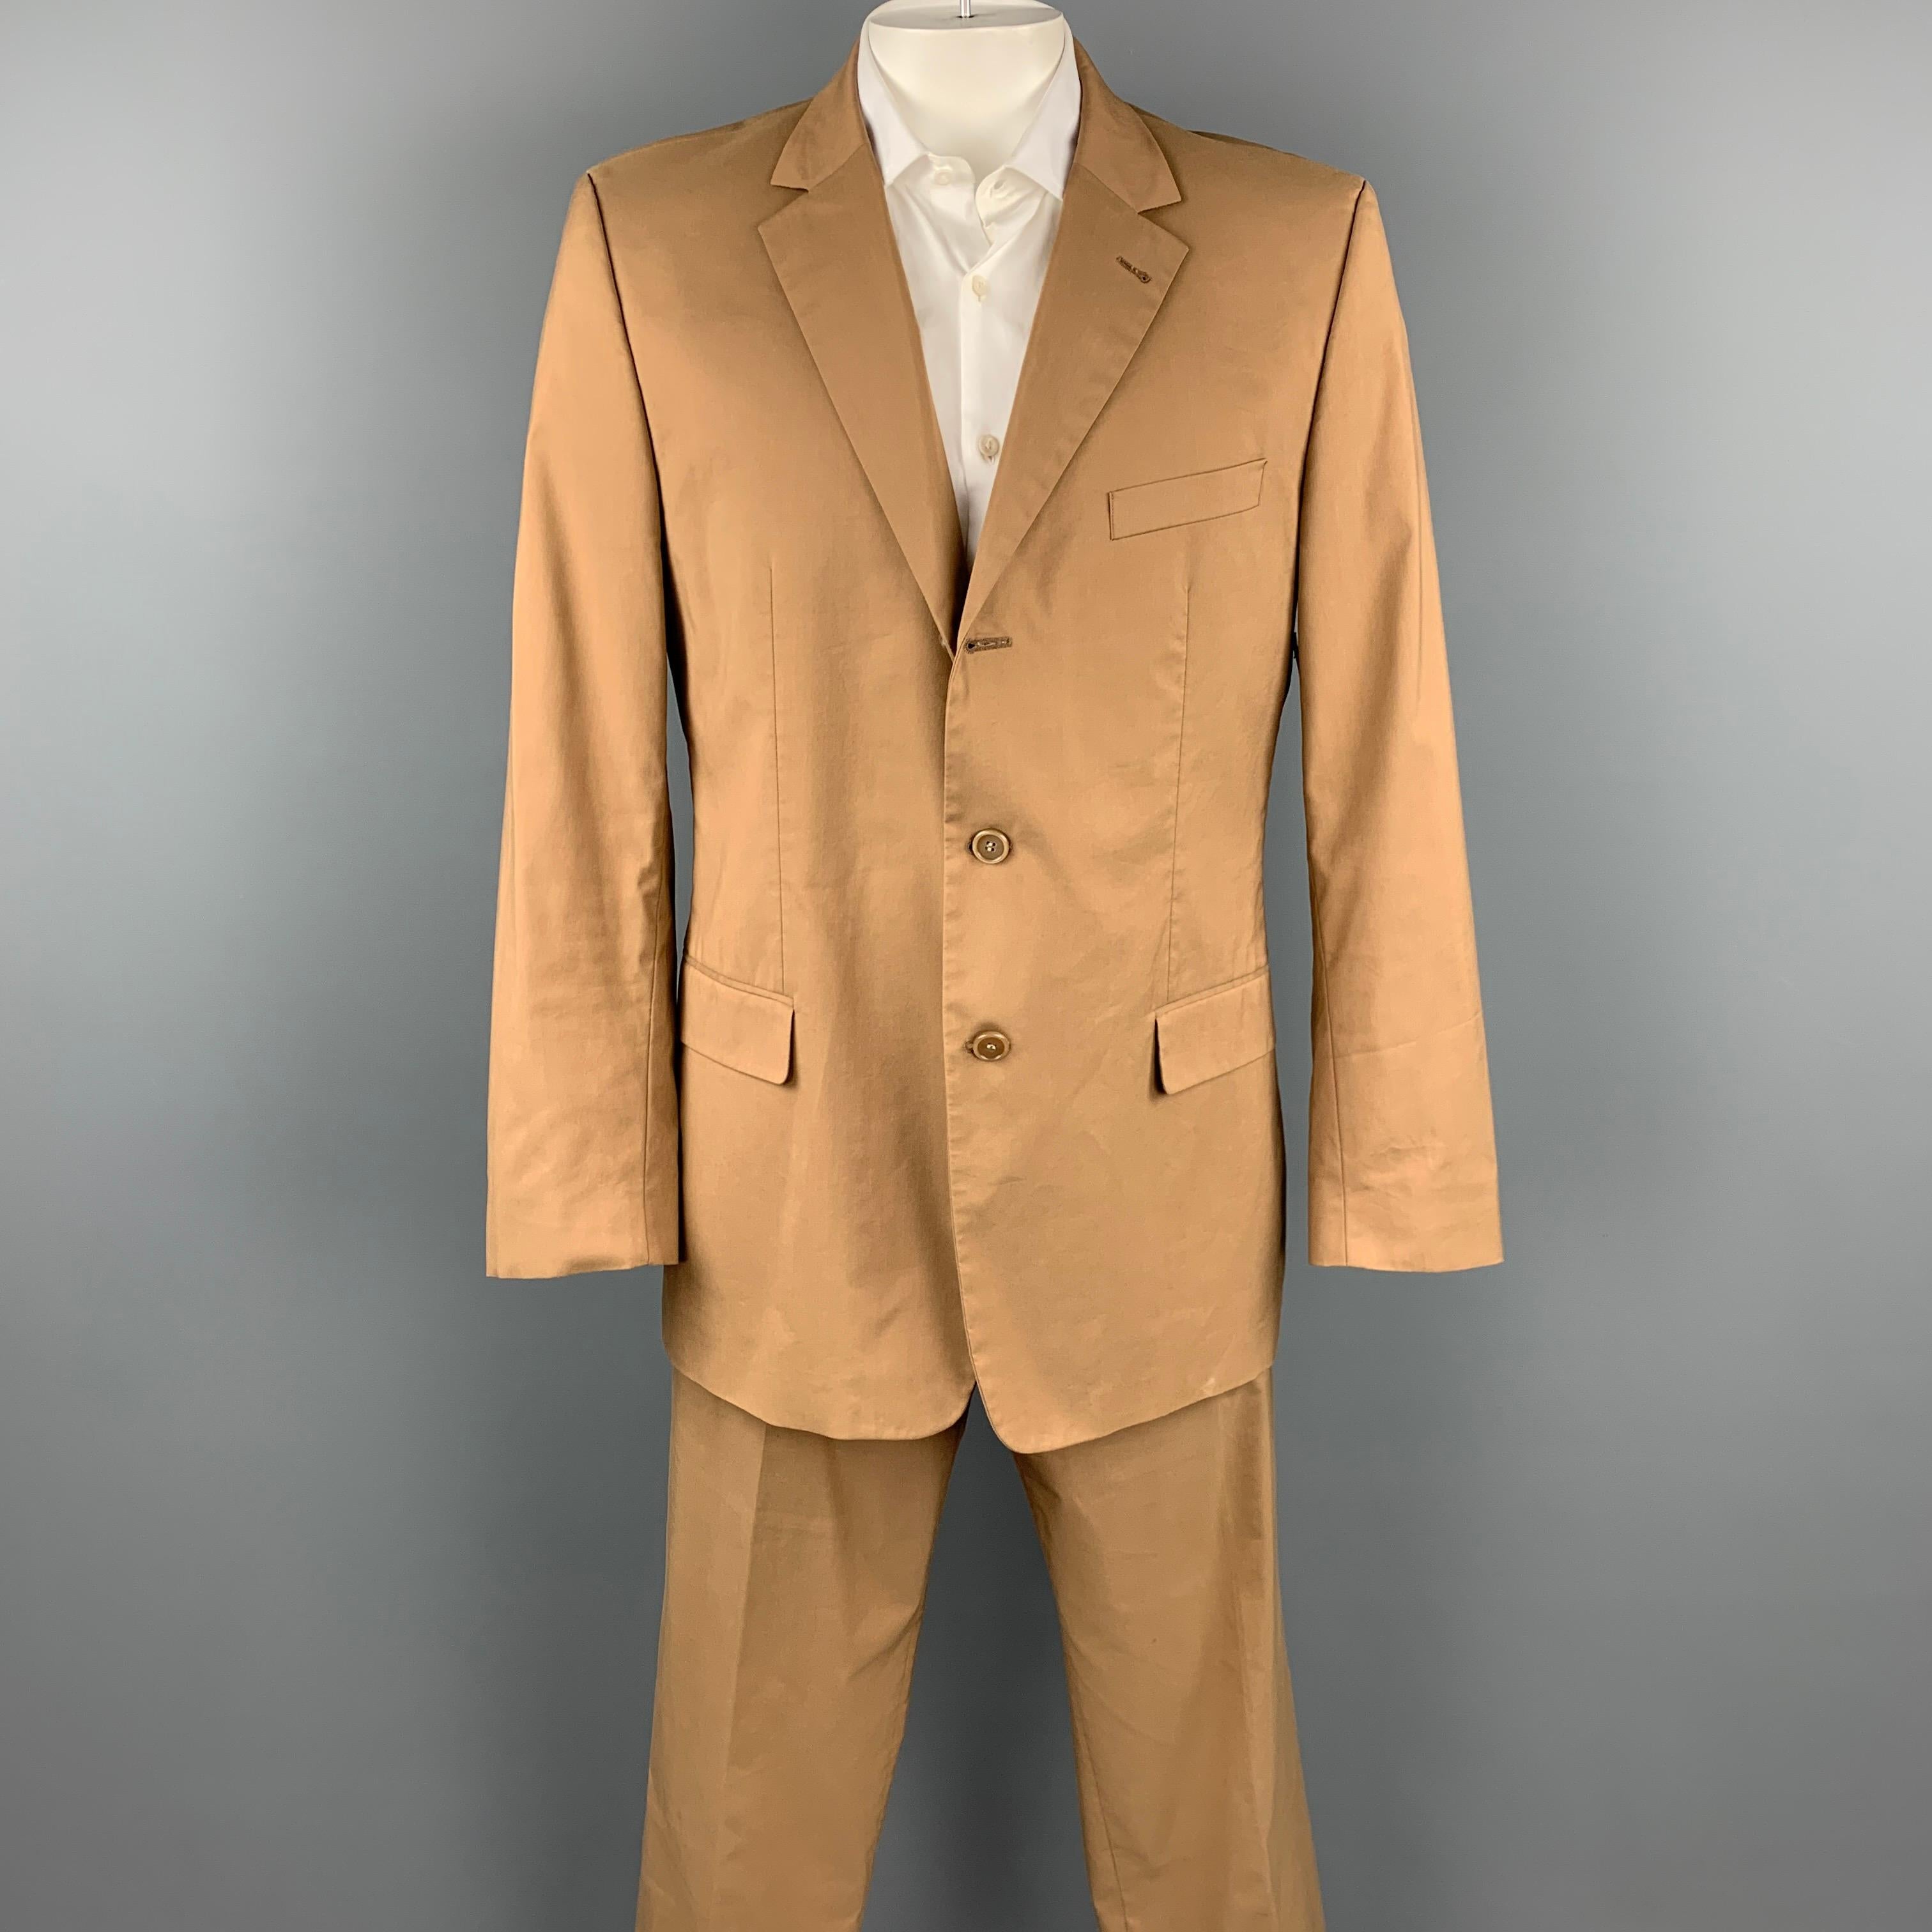 HUGO BOSS suit comes in a tan cotton with a full liner and includes a single breasted, three button sport coat with a notch lapel and matching flat front trousers.

Good Pre-Owned Condition.
Marked: 54

Measurements:

-Jacket
Shoulder: 19 in.
Chest: